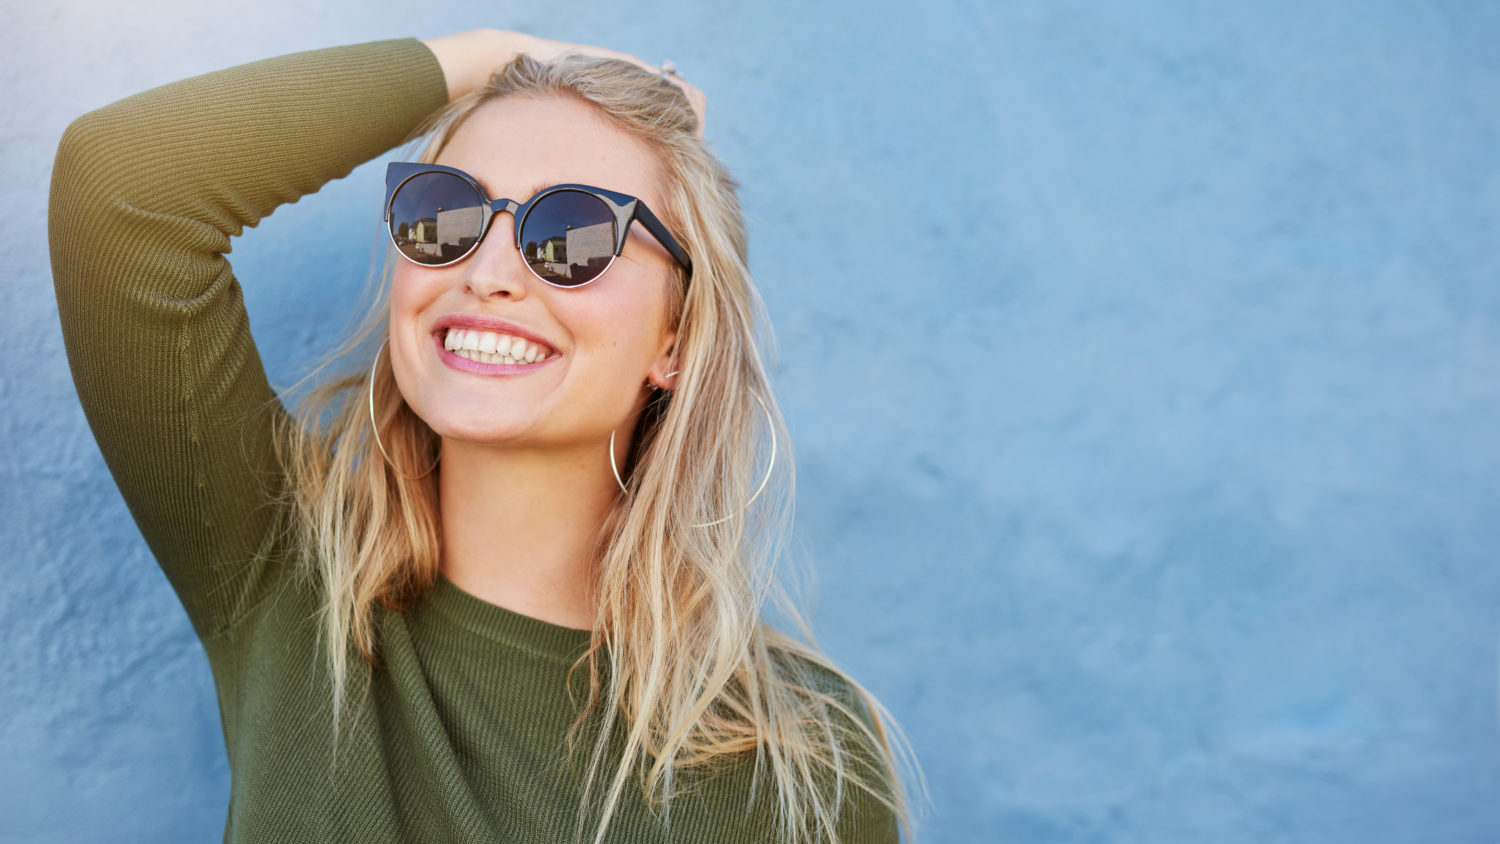 Smiling Woman With Sunglasses